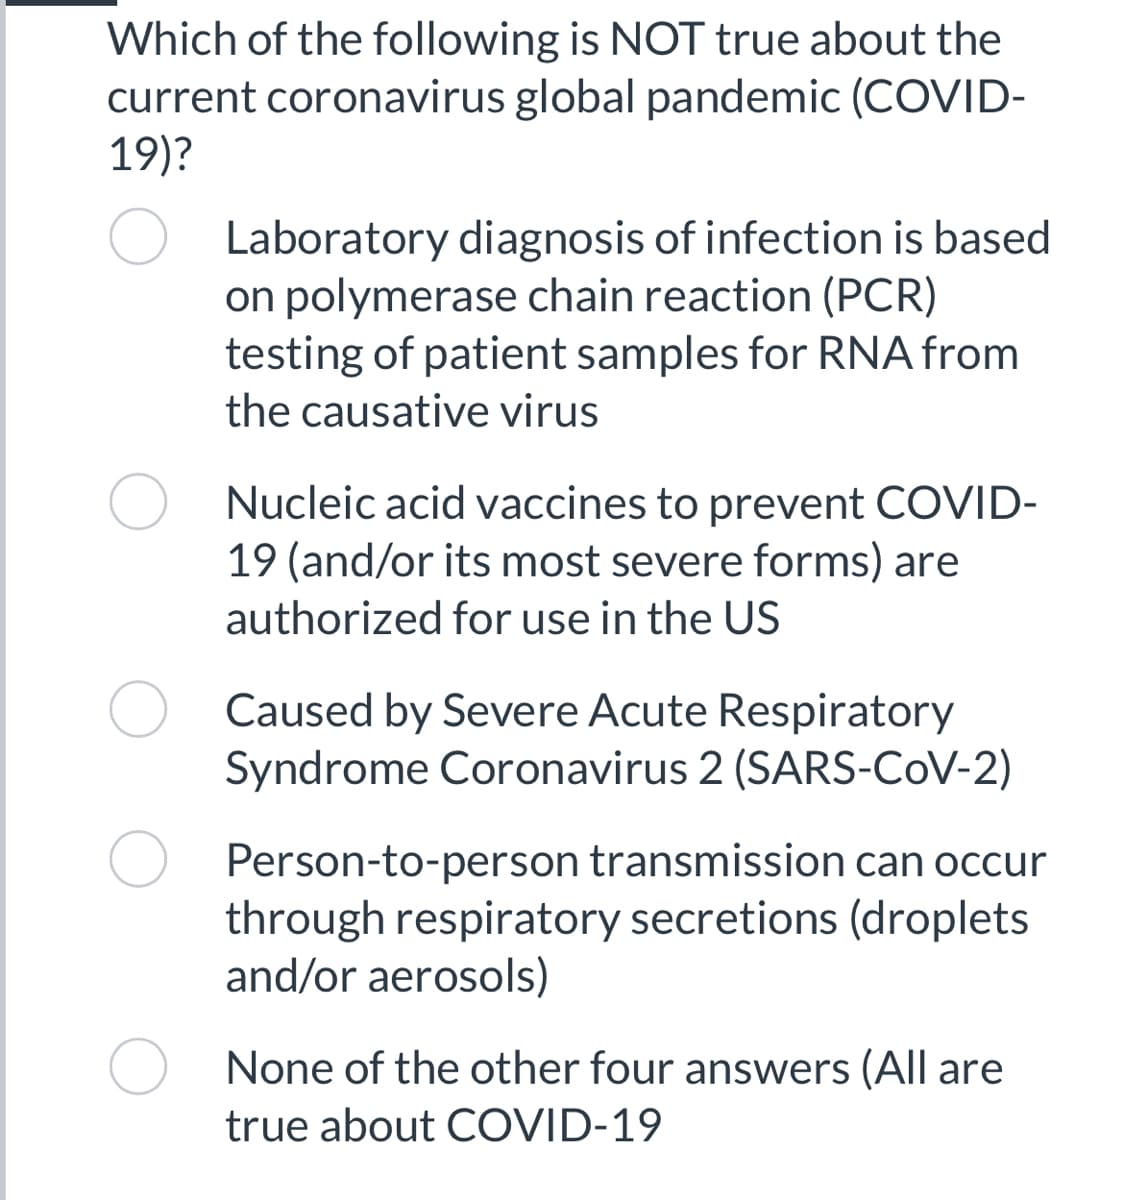 Which of the following is NOT true about the
current coronavirus global pandemic (COVID-
19)?
O Laboratory diagnosis of infection is based
on polymerase chain reaction (PCR)
testing of patient samples for RNA from
the causative virus
Nucleic acid vaccines to prevent COVID-
19 (and/or its most severe forms) are
authorized for use in the US
Caused by Severe Acute Respiratory
Syndrome Coronavirus 2 (SARS-CoV-2)
Person-to-person transmission can occur
through respiratory secretions (droplets
and/or aerosols)
None of the other four answers (All are
true about COVID-19